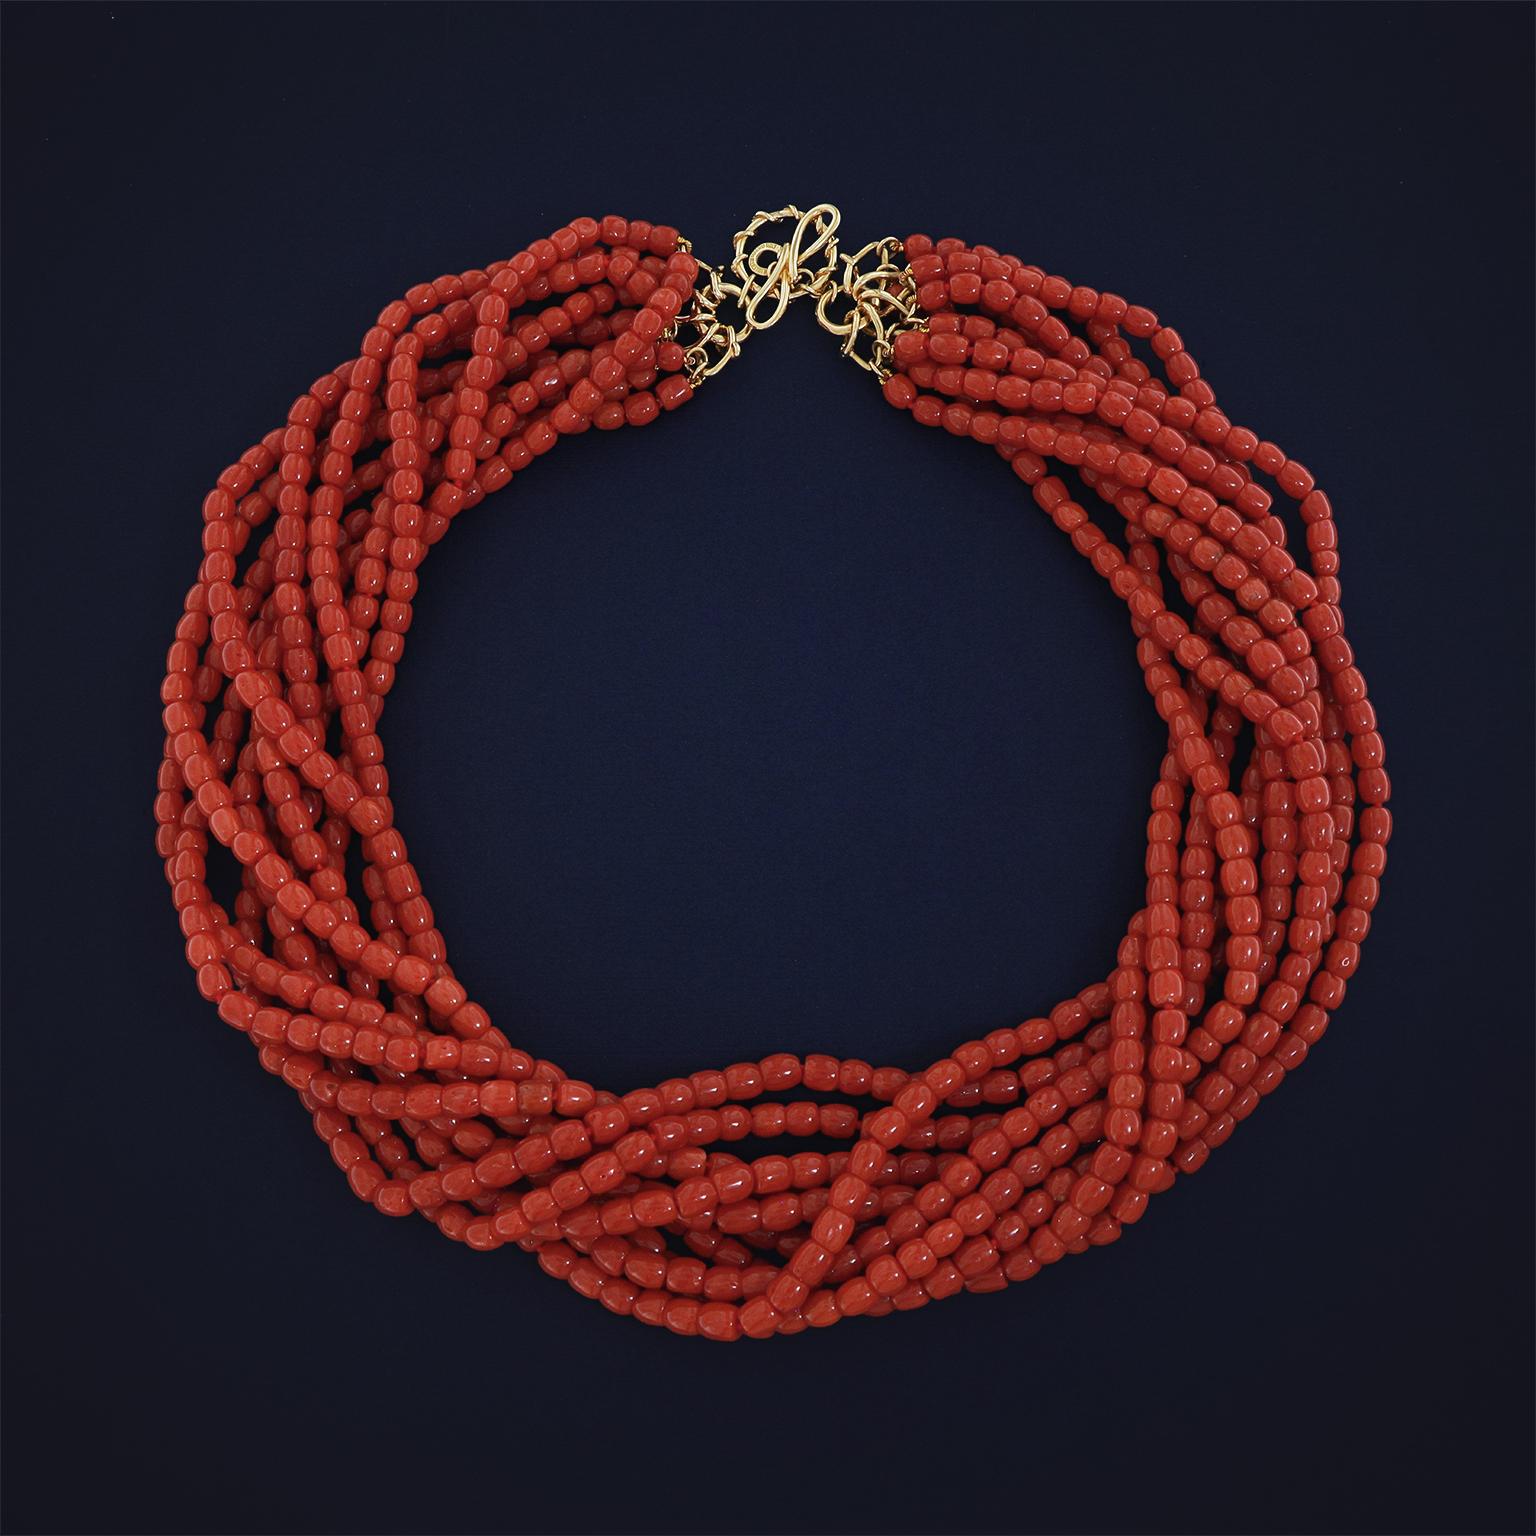 Striking intensity of Sardinian red coral is the focus of this necklace. Smooth carvings of the deep red precious gem are strung together on ten strands. Next the strands are twisted in a torsade, then joined together by V-shaped links. The total